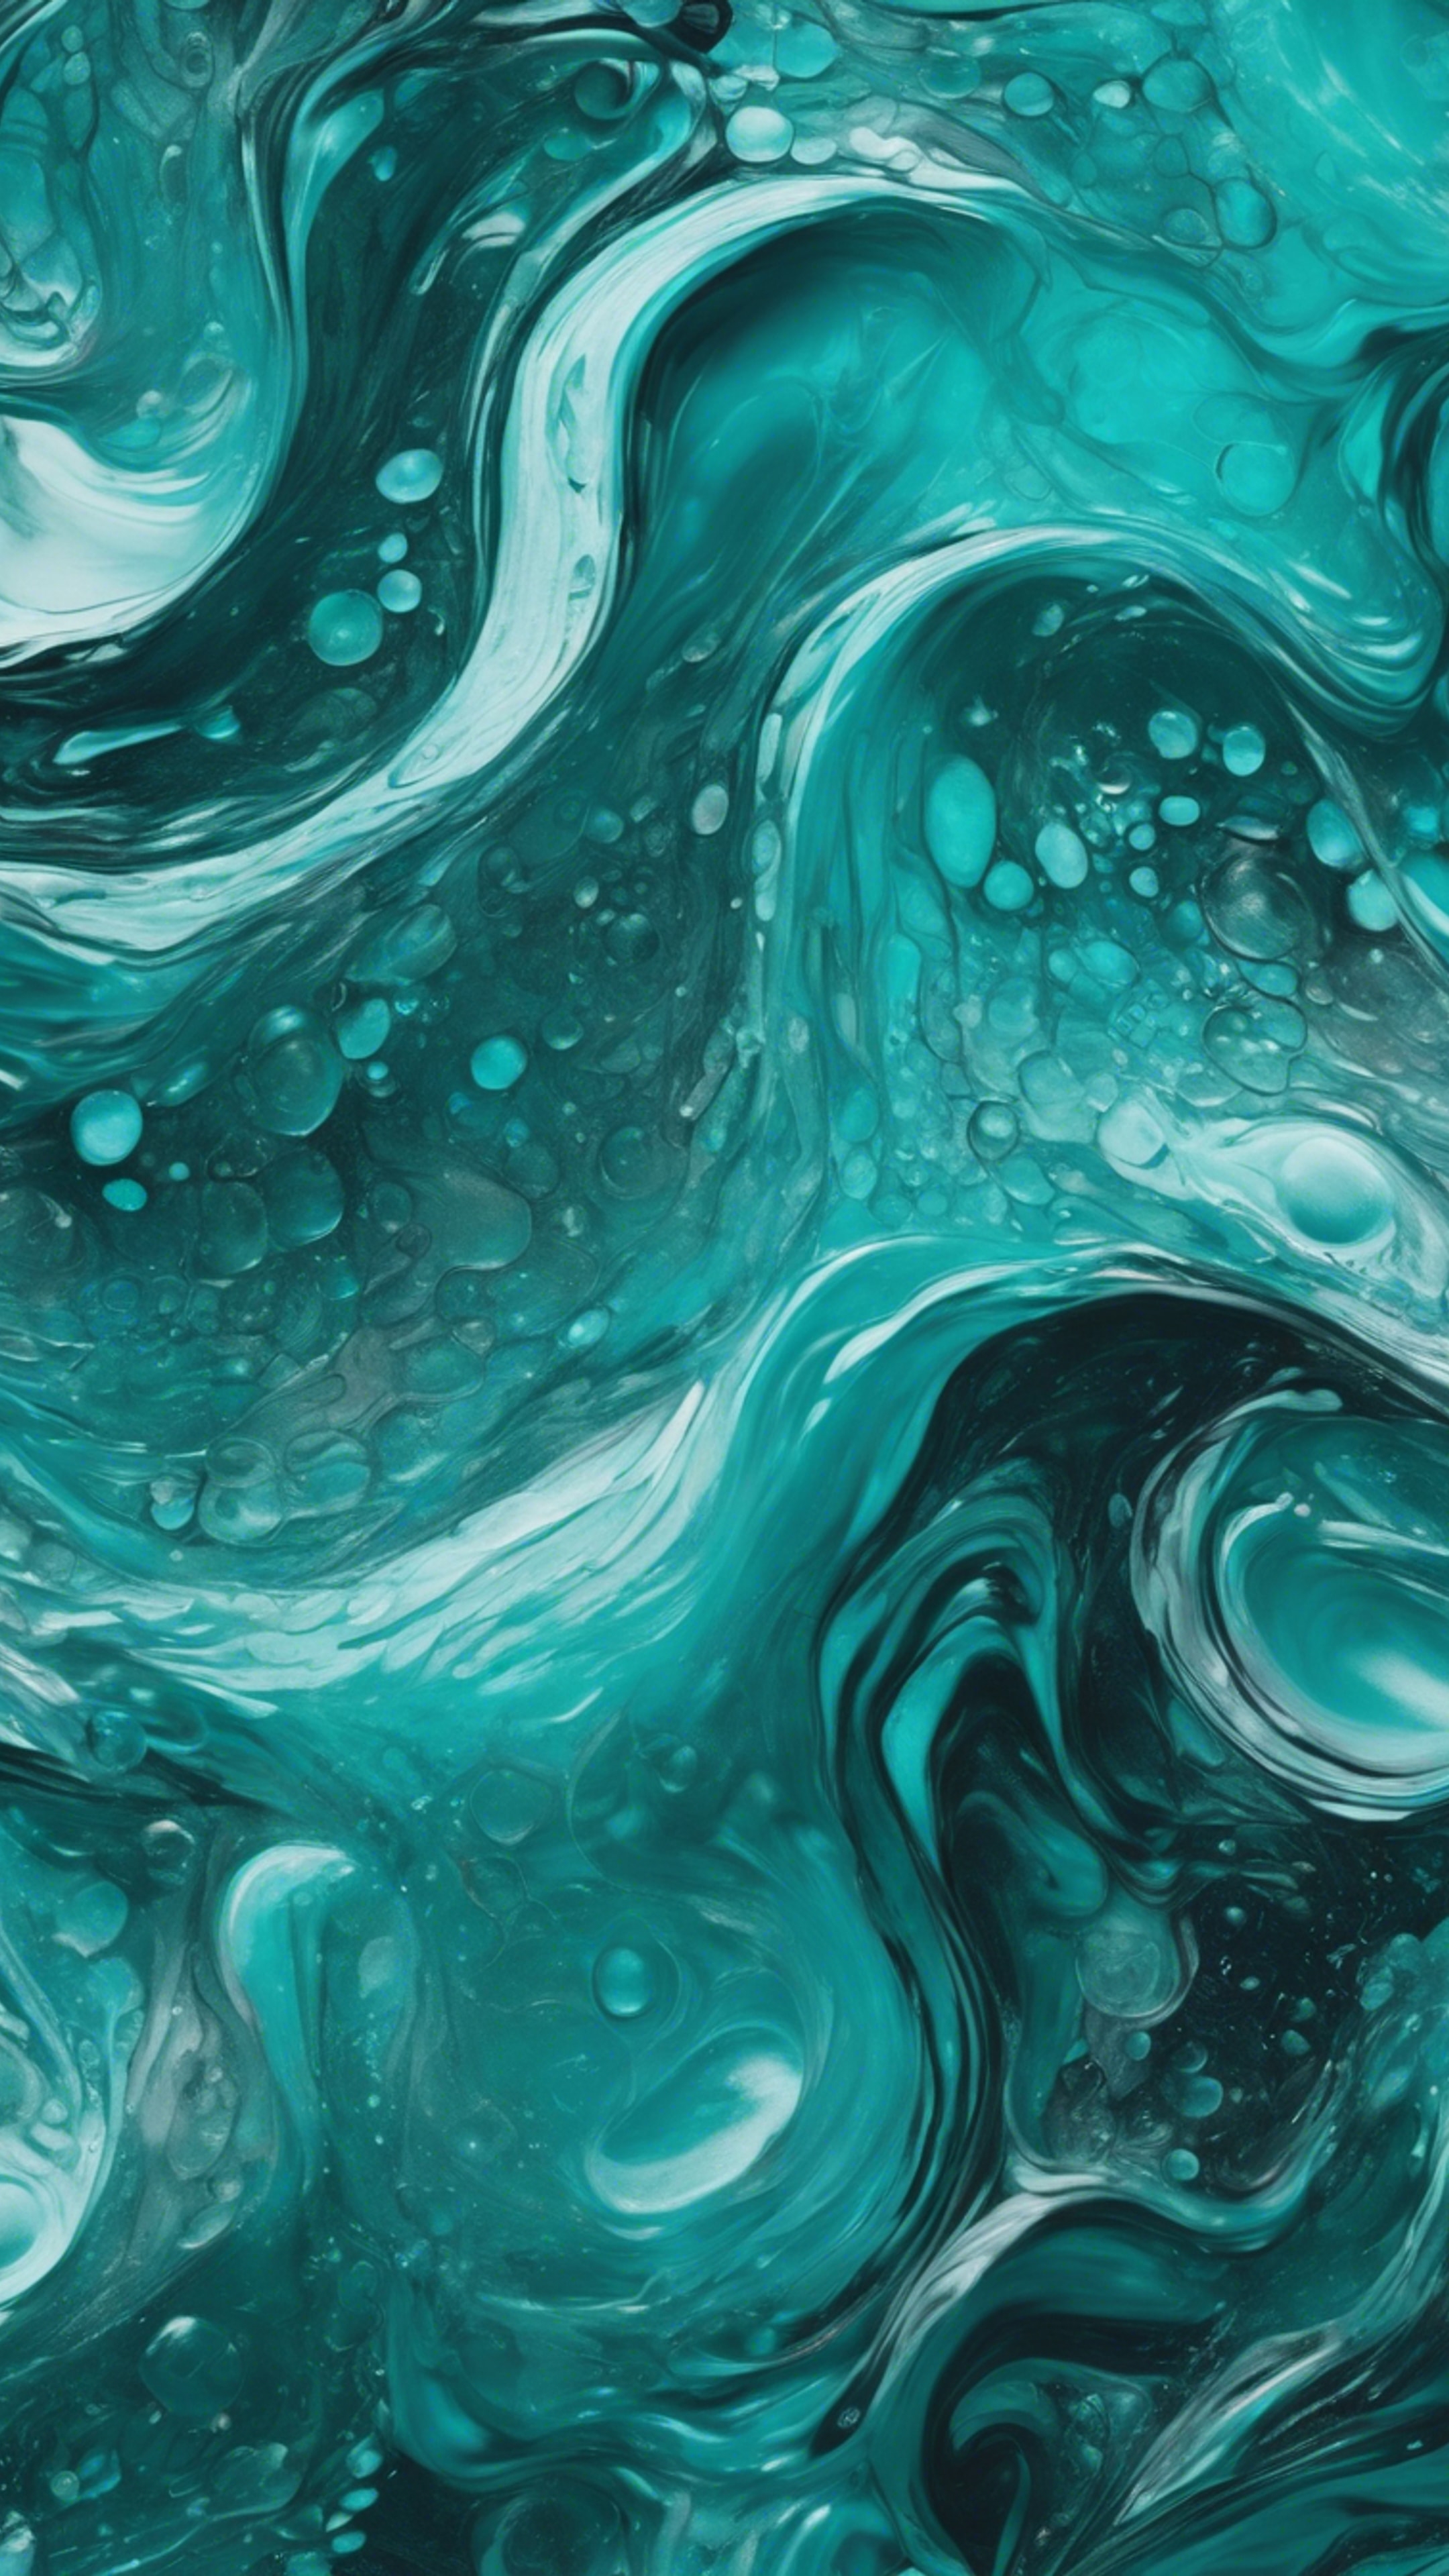 Abstract painting with swirling waves of shades of cool teal. Fondo de pantalla[053c1b1ade8044ef8a45]